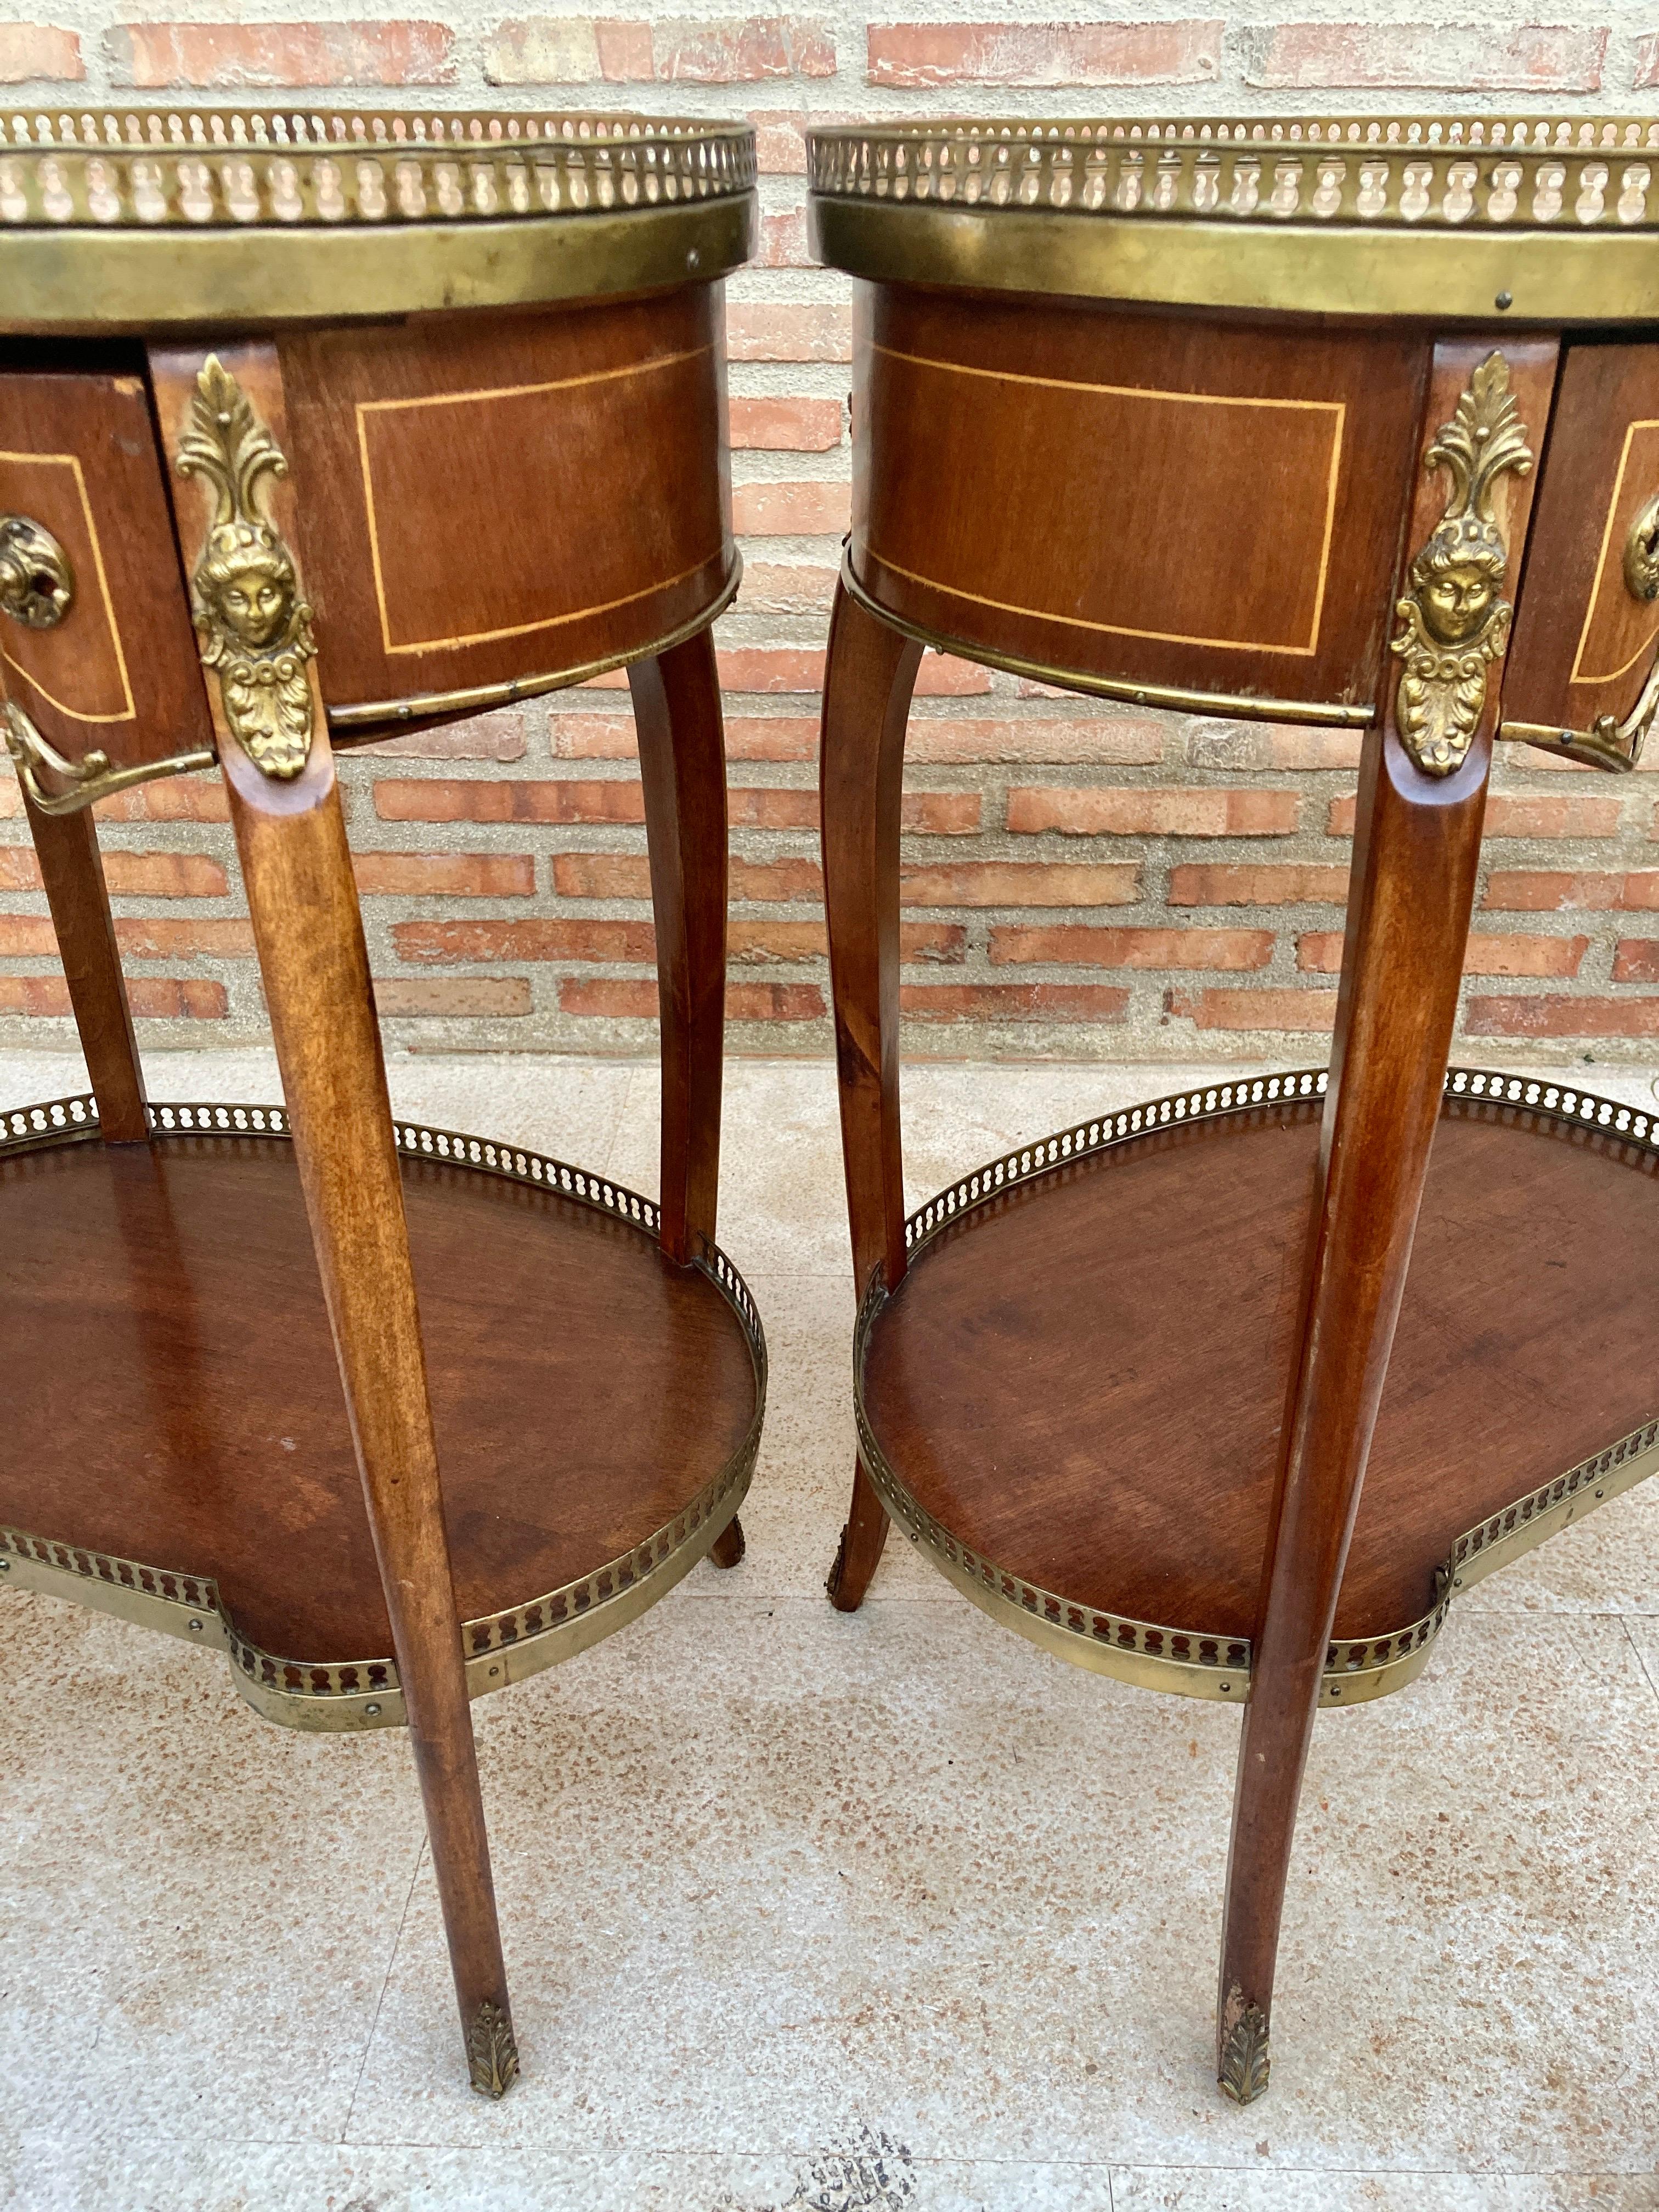 20th Century Carved Wood Kidney Shaped Bedside Tables with Bronze and Marble Top, Set of 2 For Sale